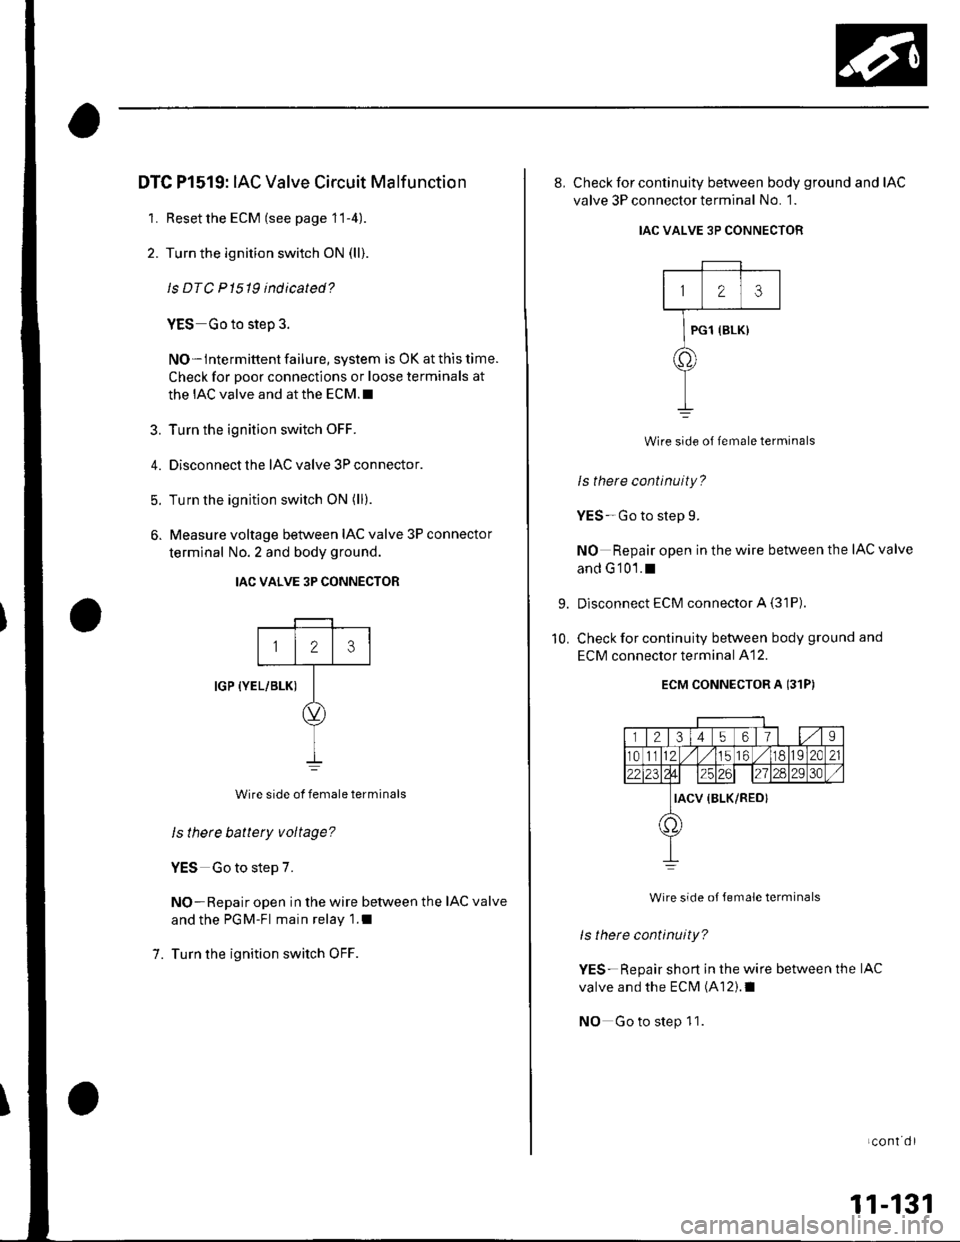 HONDA CIVIC 2003 7.G Workshop Manual DTC Pl519: IAC Valve Circuit Malf unction
1. Resetthe ECM (see page 11-4).
2. Turn the ignition switch ON (ll)
ls DTC P 1519 indicated?
YES Go to step 3.
NO-lntermittent failure, system is OK at this 